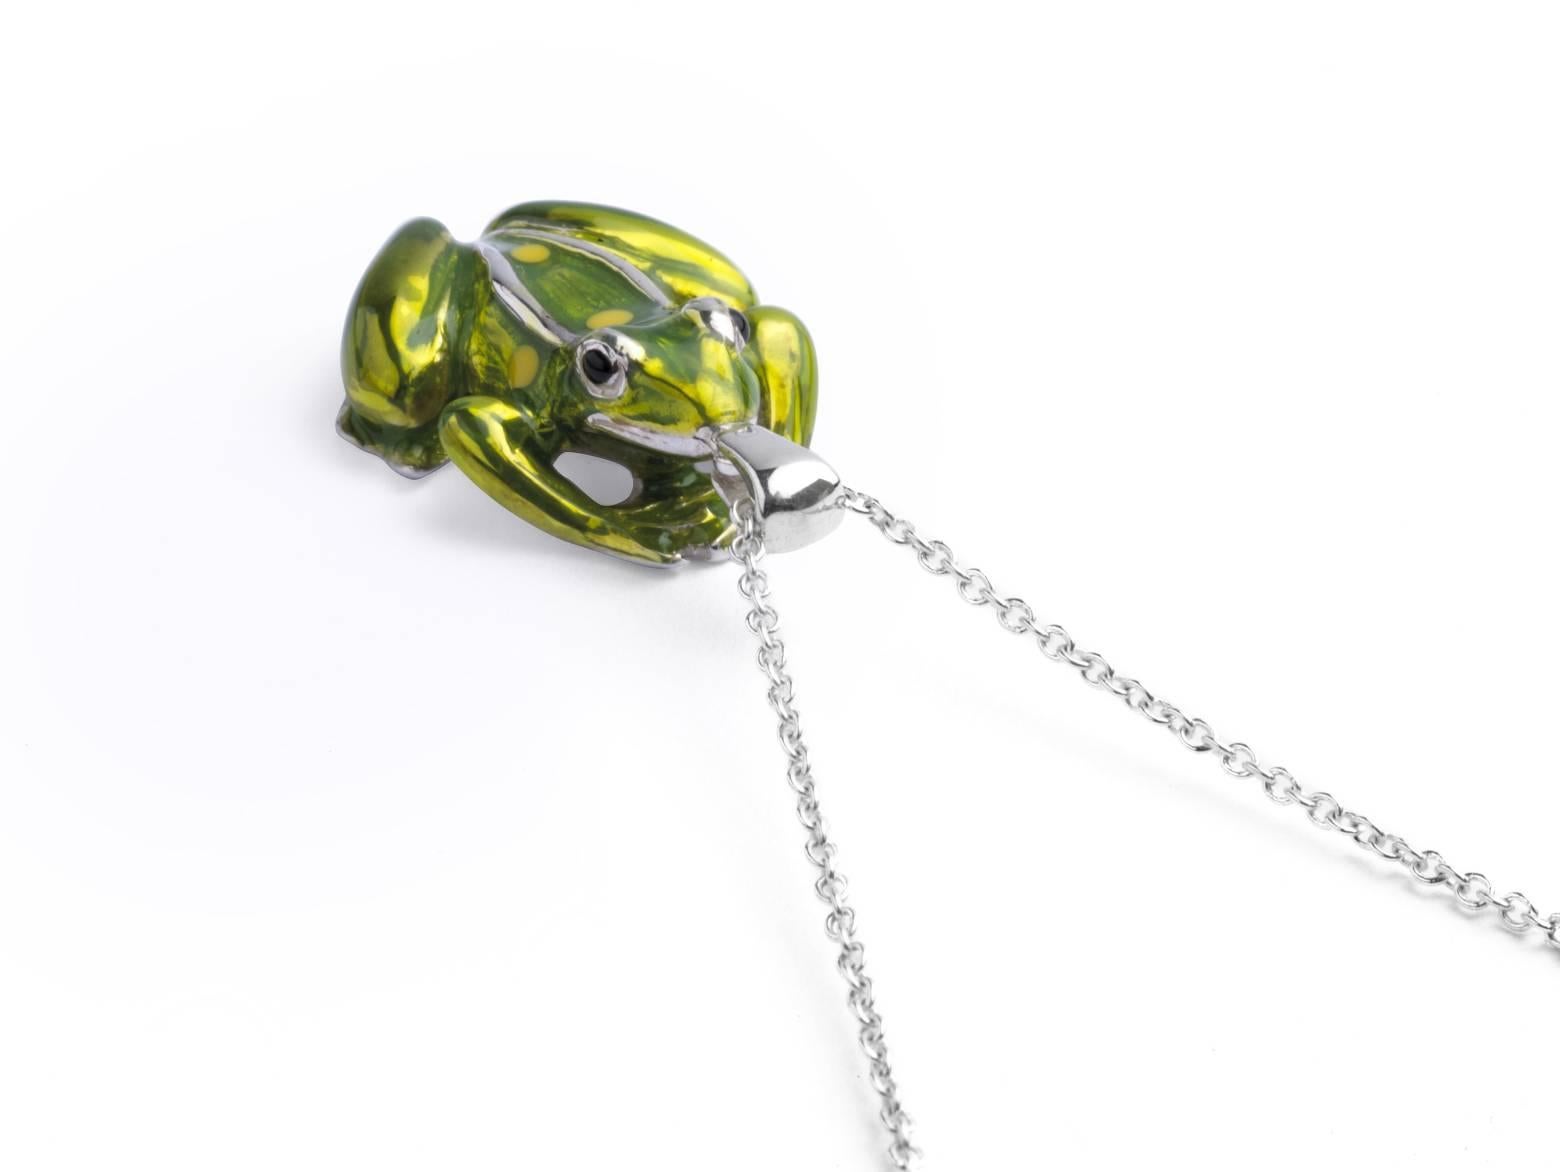 
The sterling silver frog pendant has a green enamel finish and is fitted on to a 15